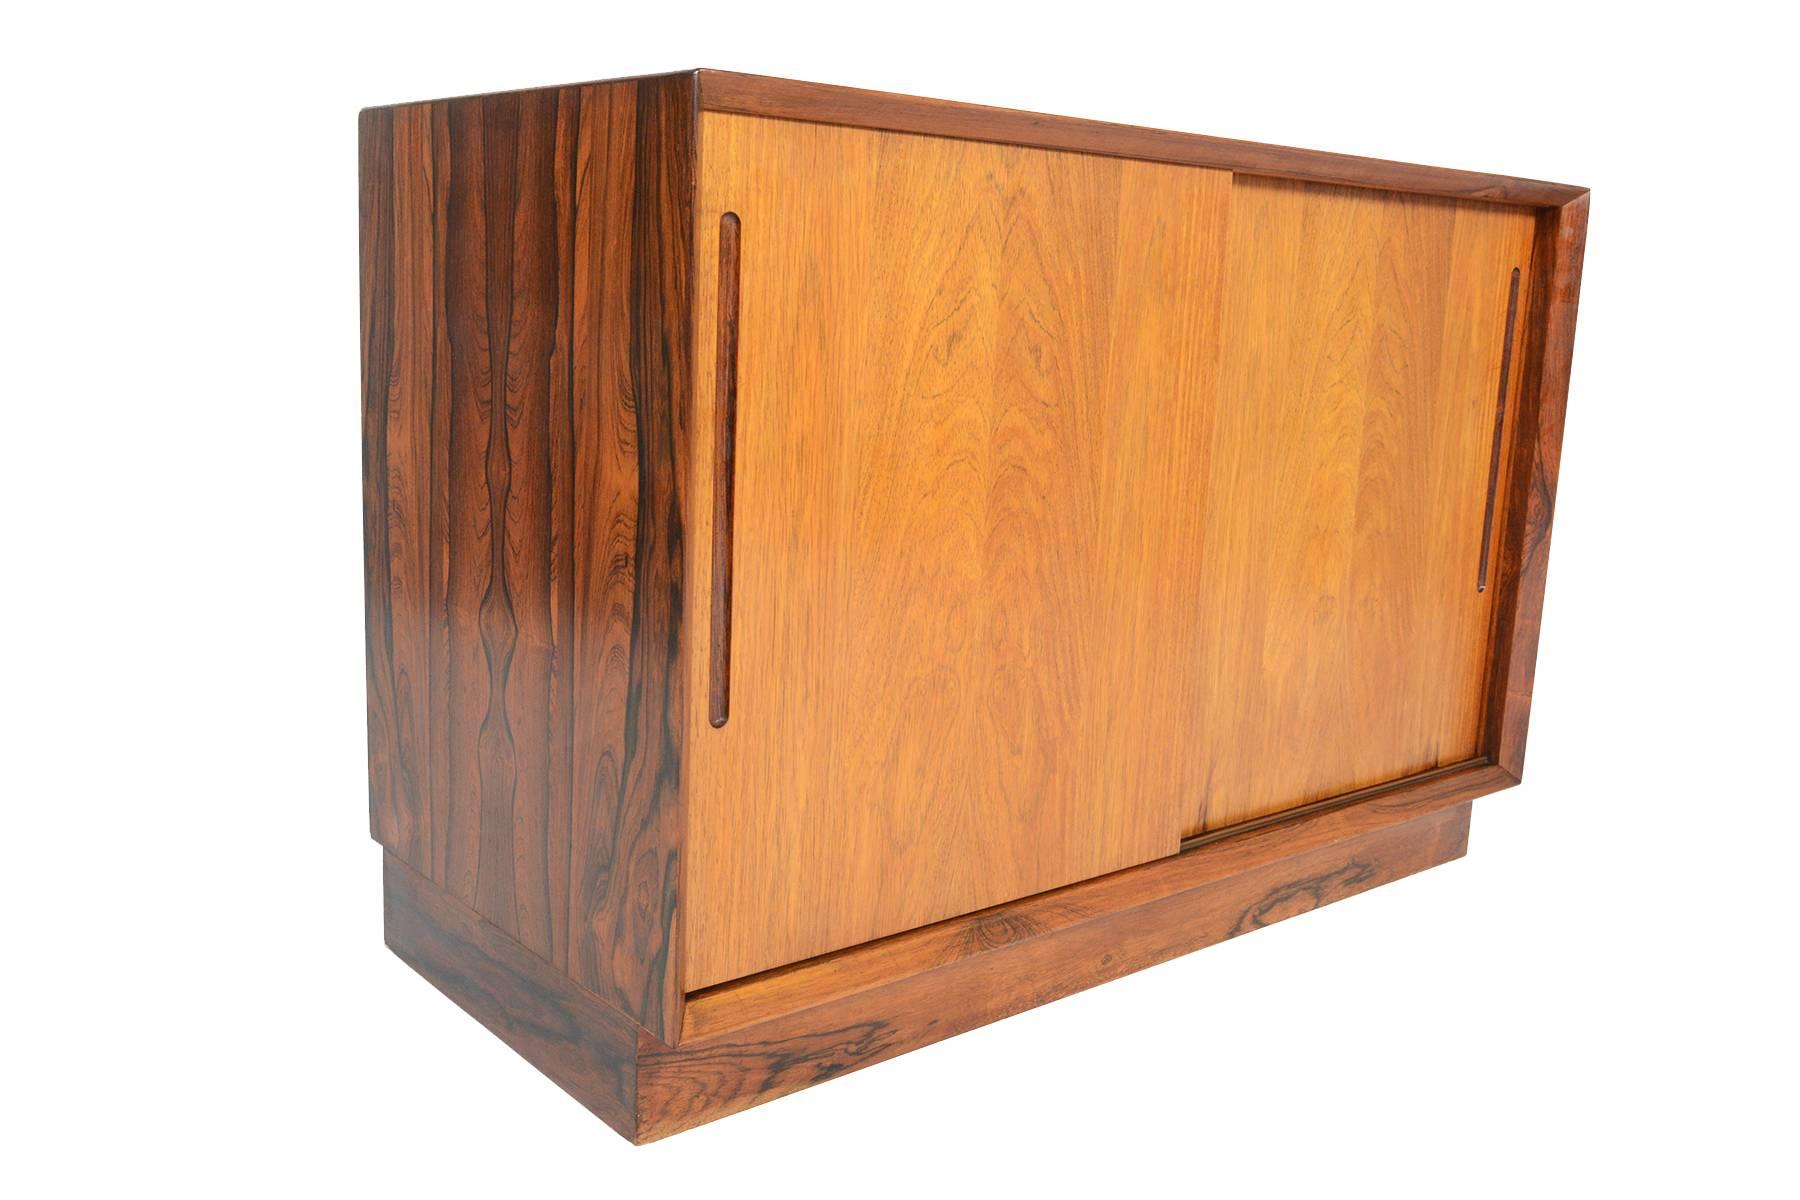 This Danish modern Mid-Century medium sized rosewood credenza offers two sliding doors accented by carved pulls. Doors open to reveal open storage with a removable shelf. Case sits on a solid plinth base completing its elegant Silhouette. In